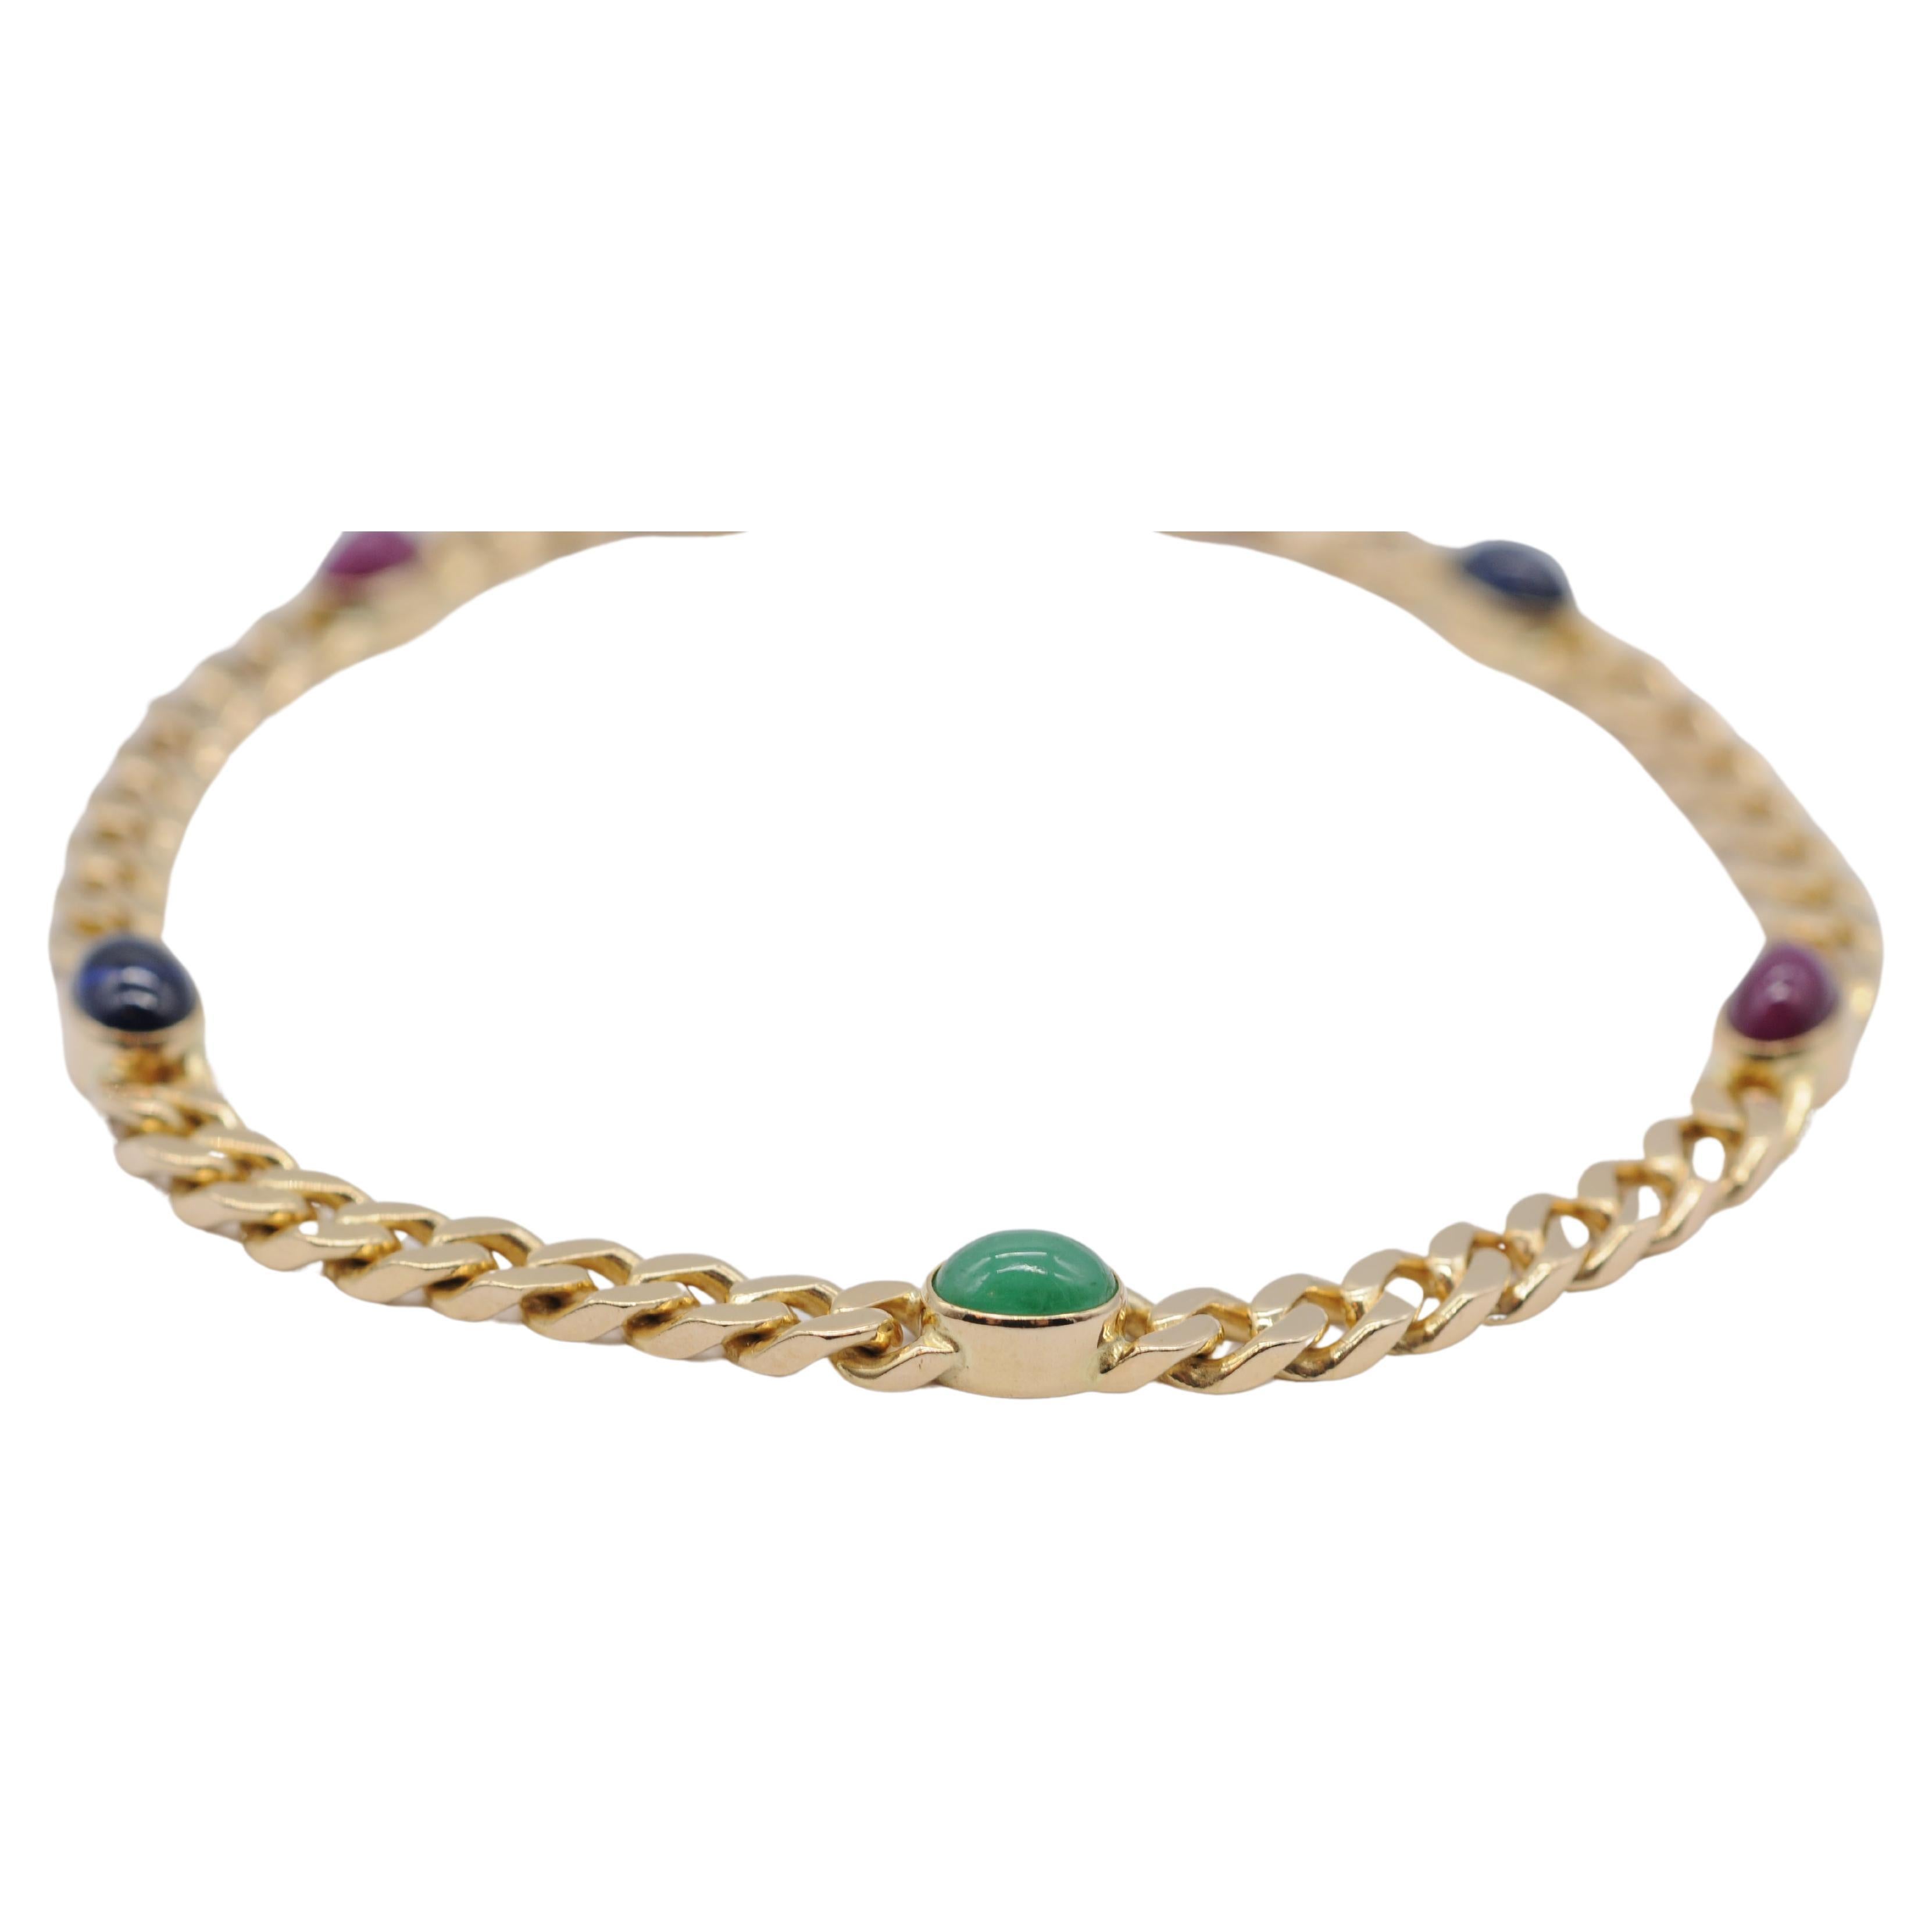 Noble 14k yellow gold bracelet with cabochon For Sale 2